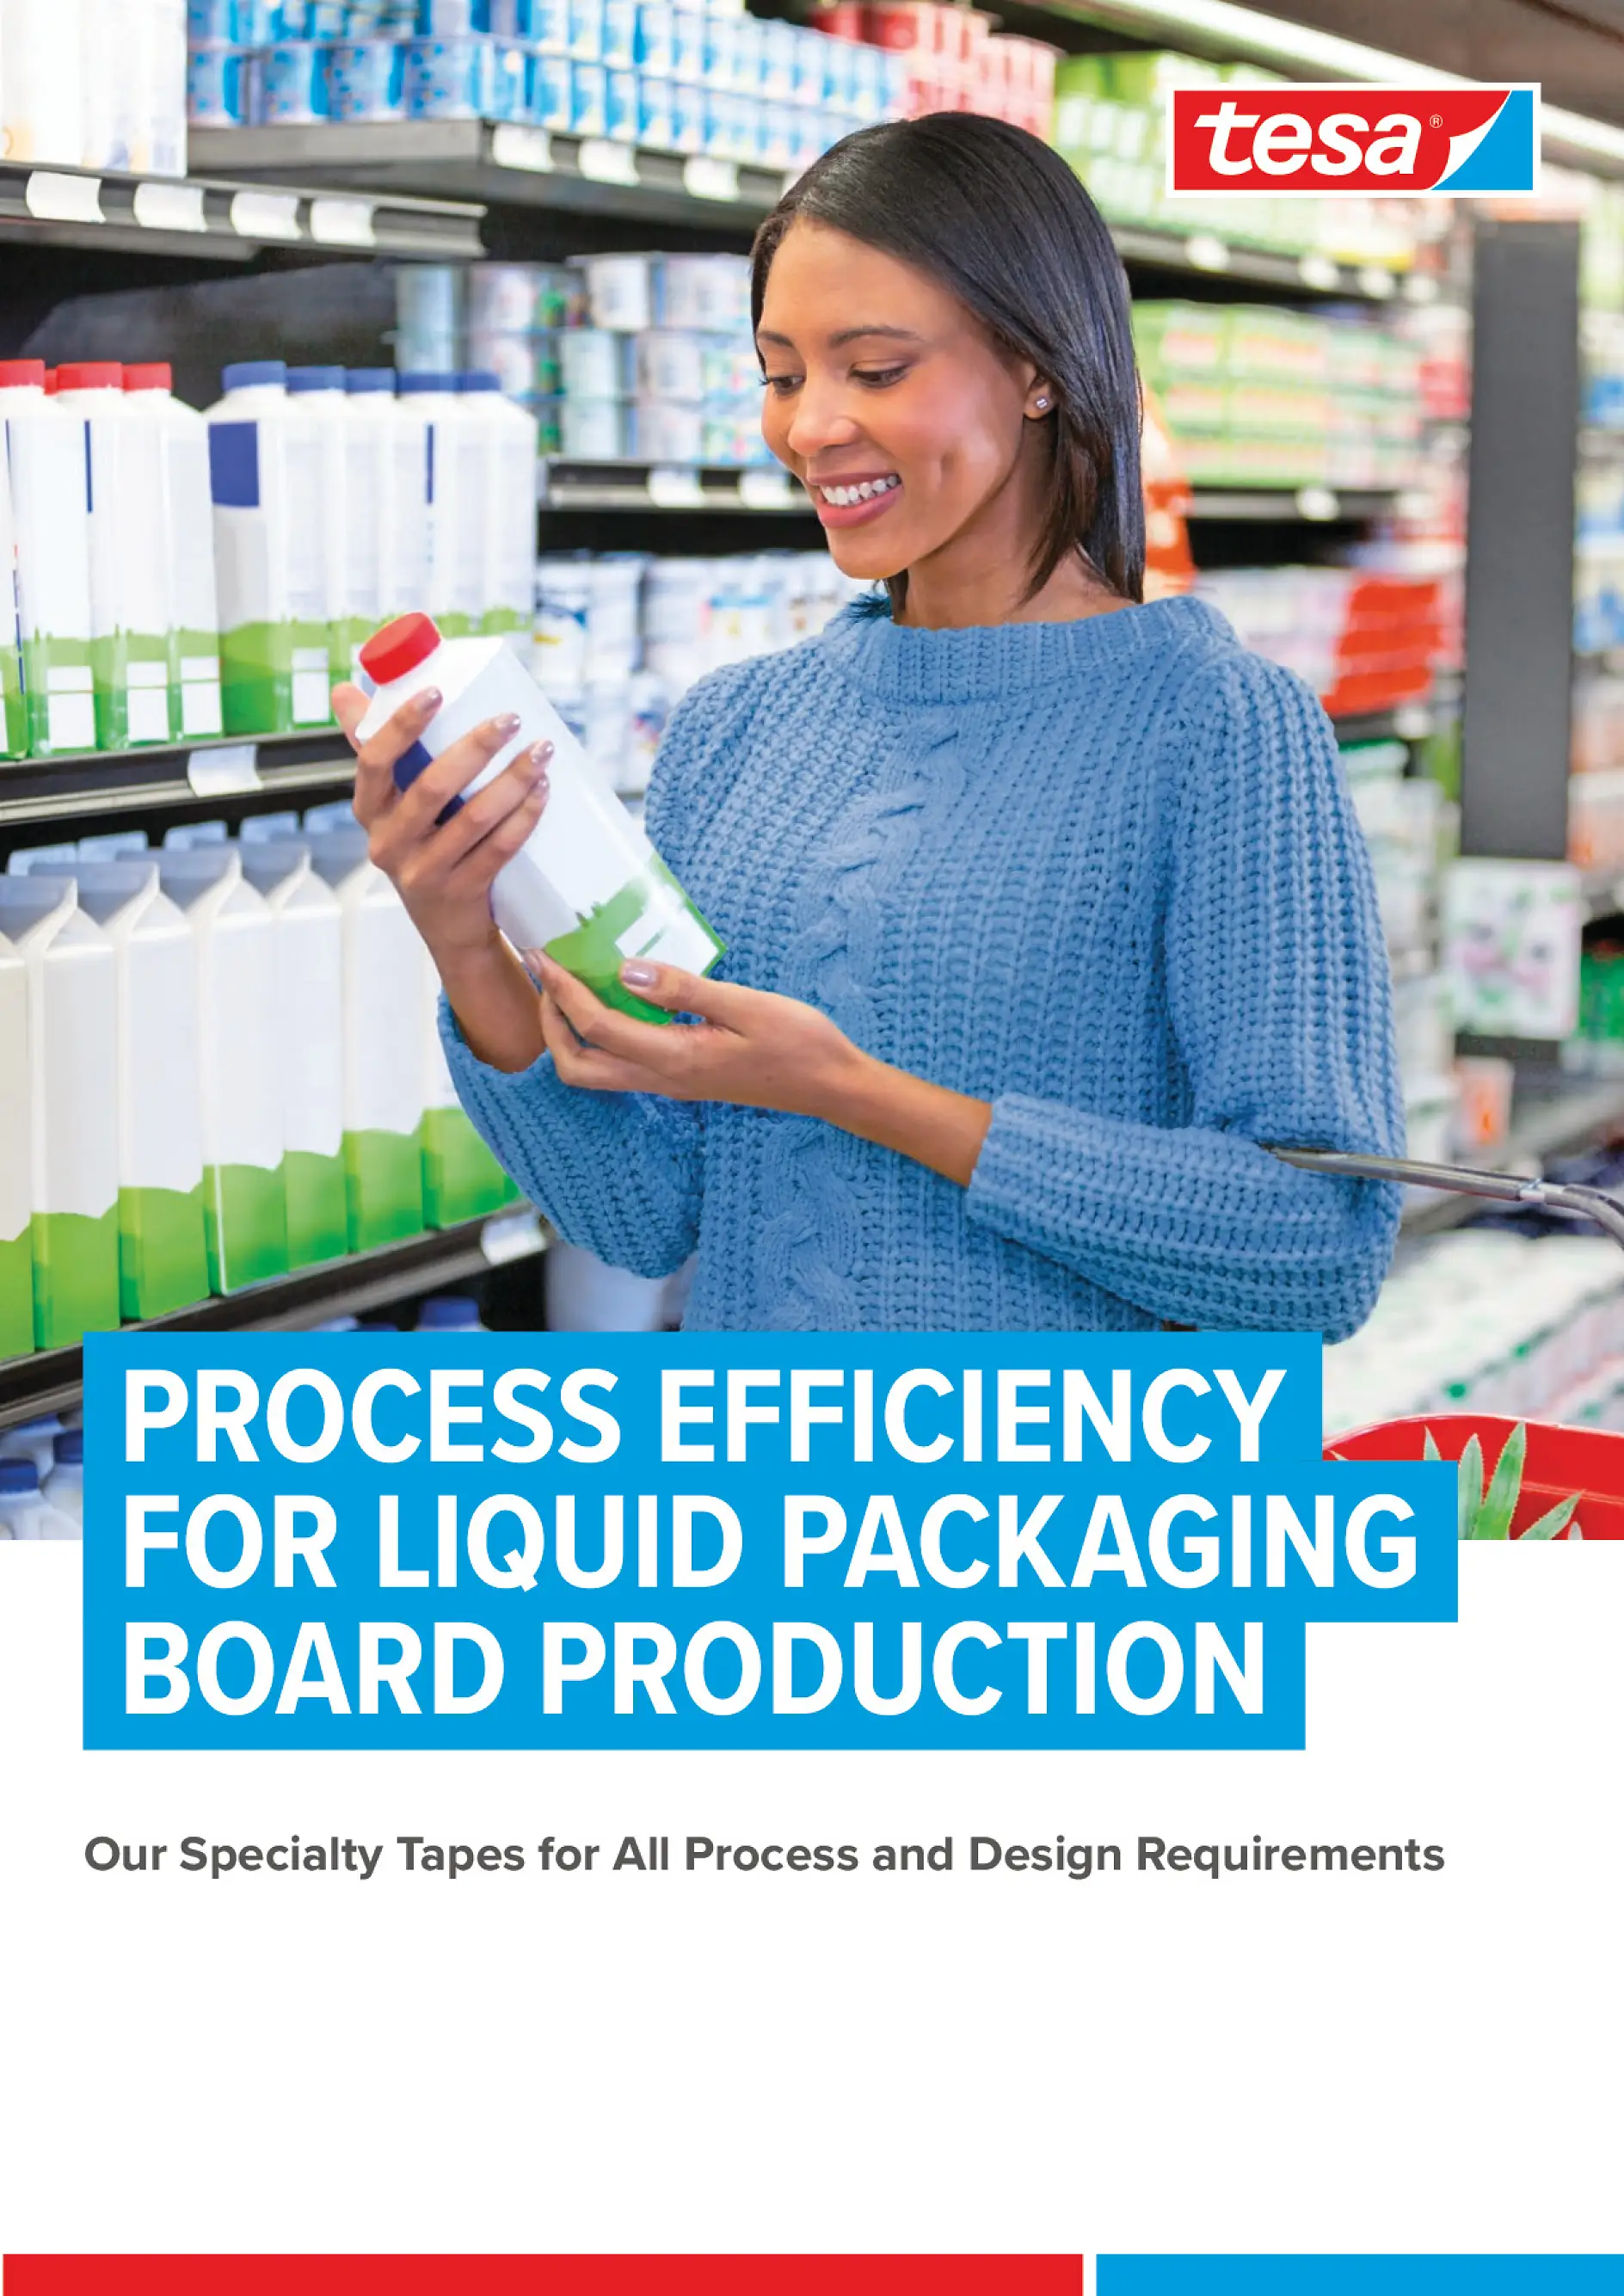 Brochure for liquid packaging board producers.